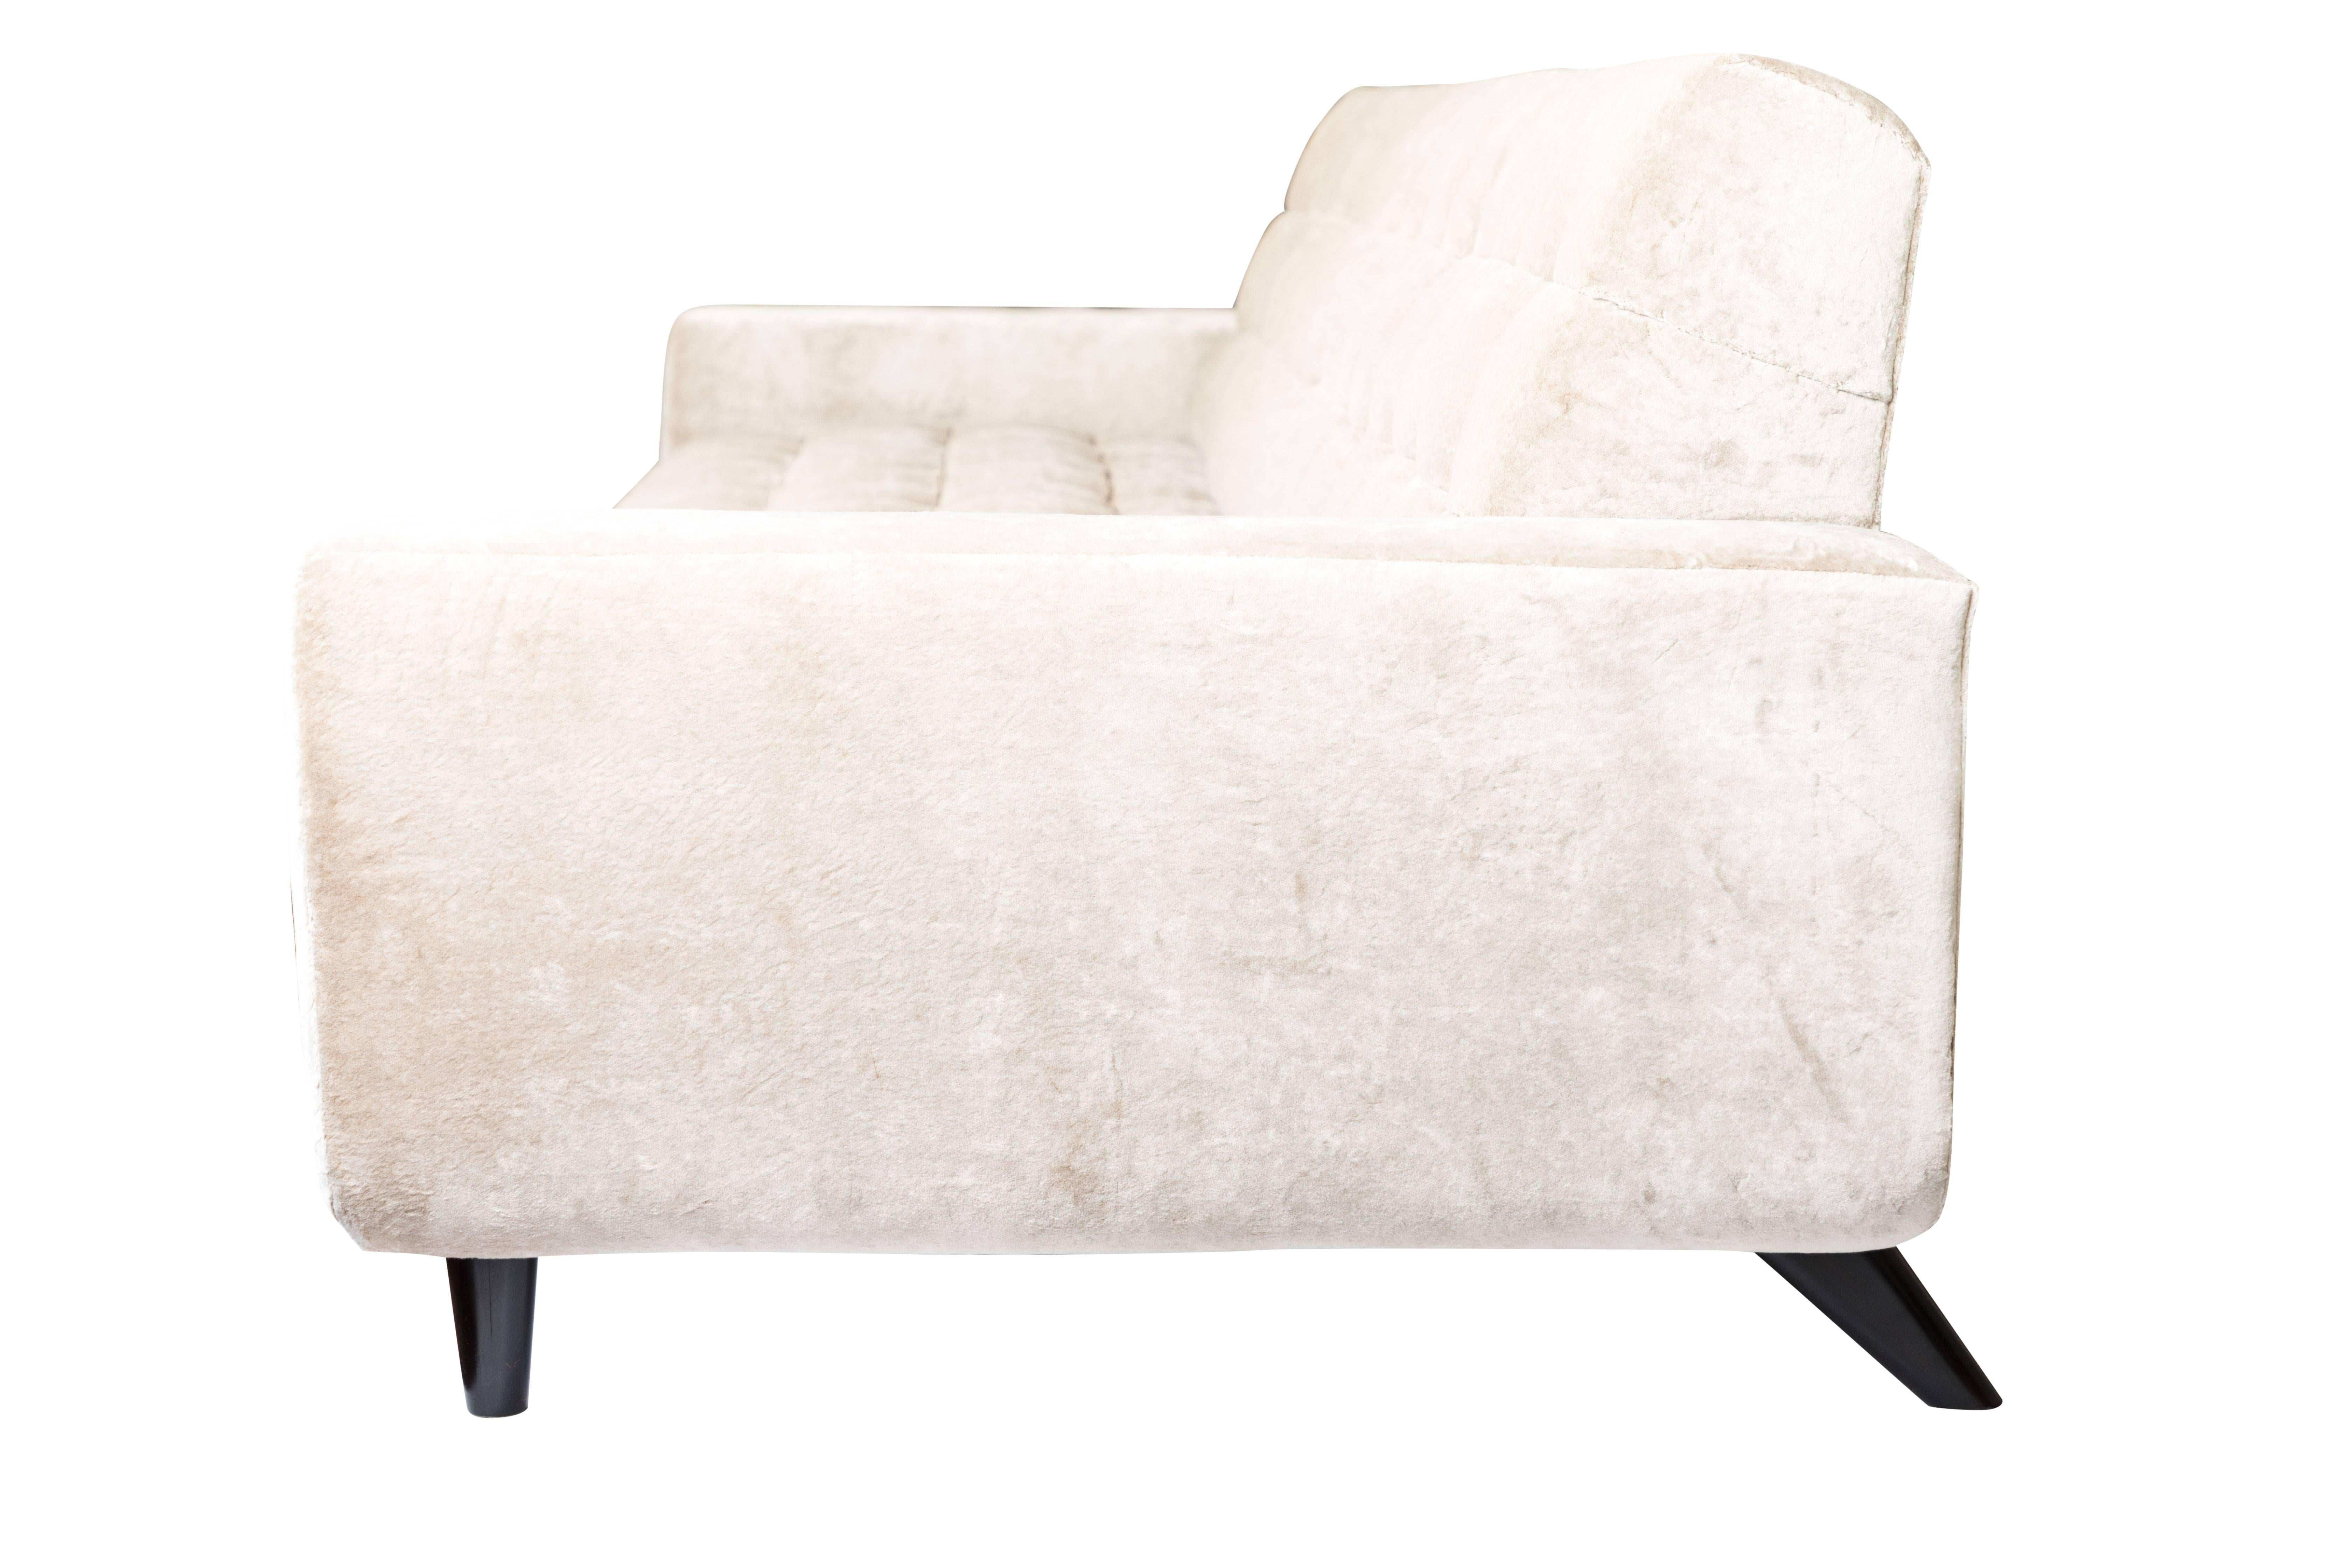 Beautiful Biscuit Tufted Ledge Back Sofa by William Haines 2